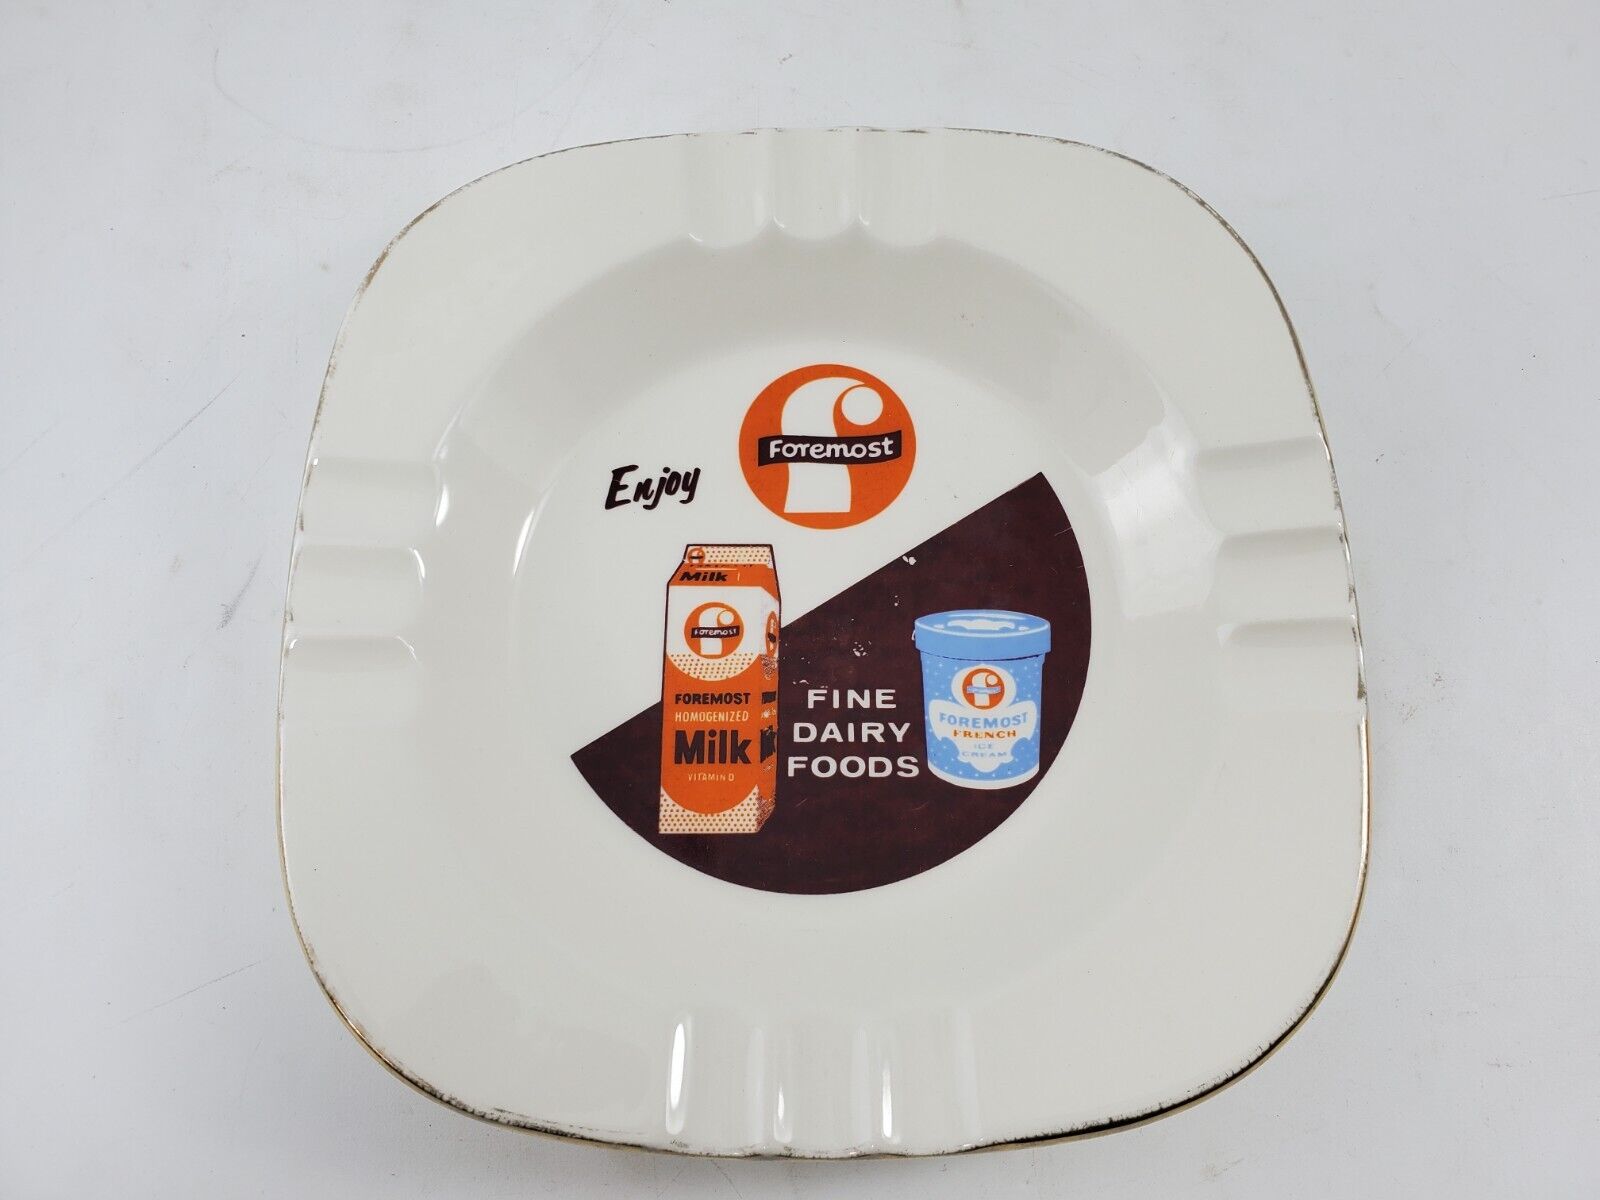 Vintage Foremost Milk Dairy Products Advertising Ashtray